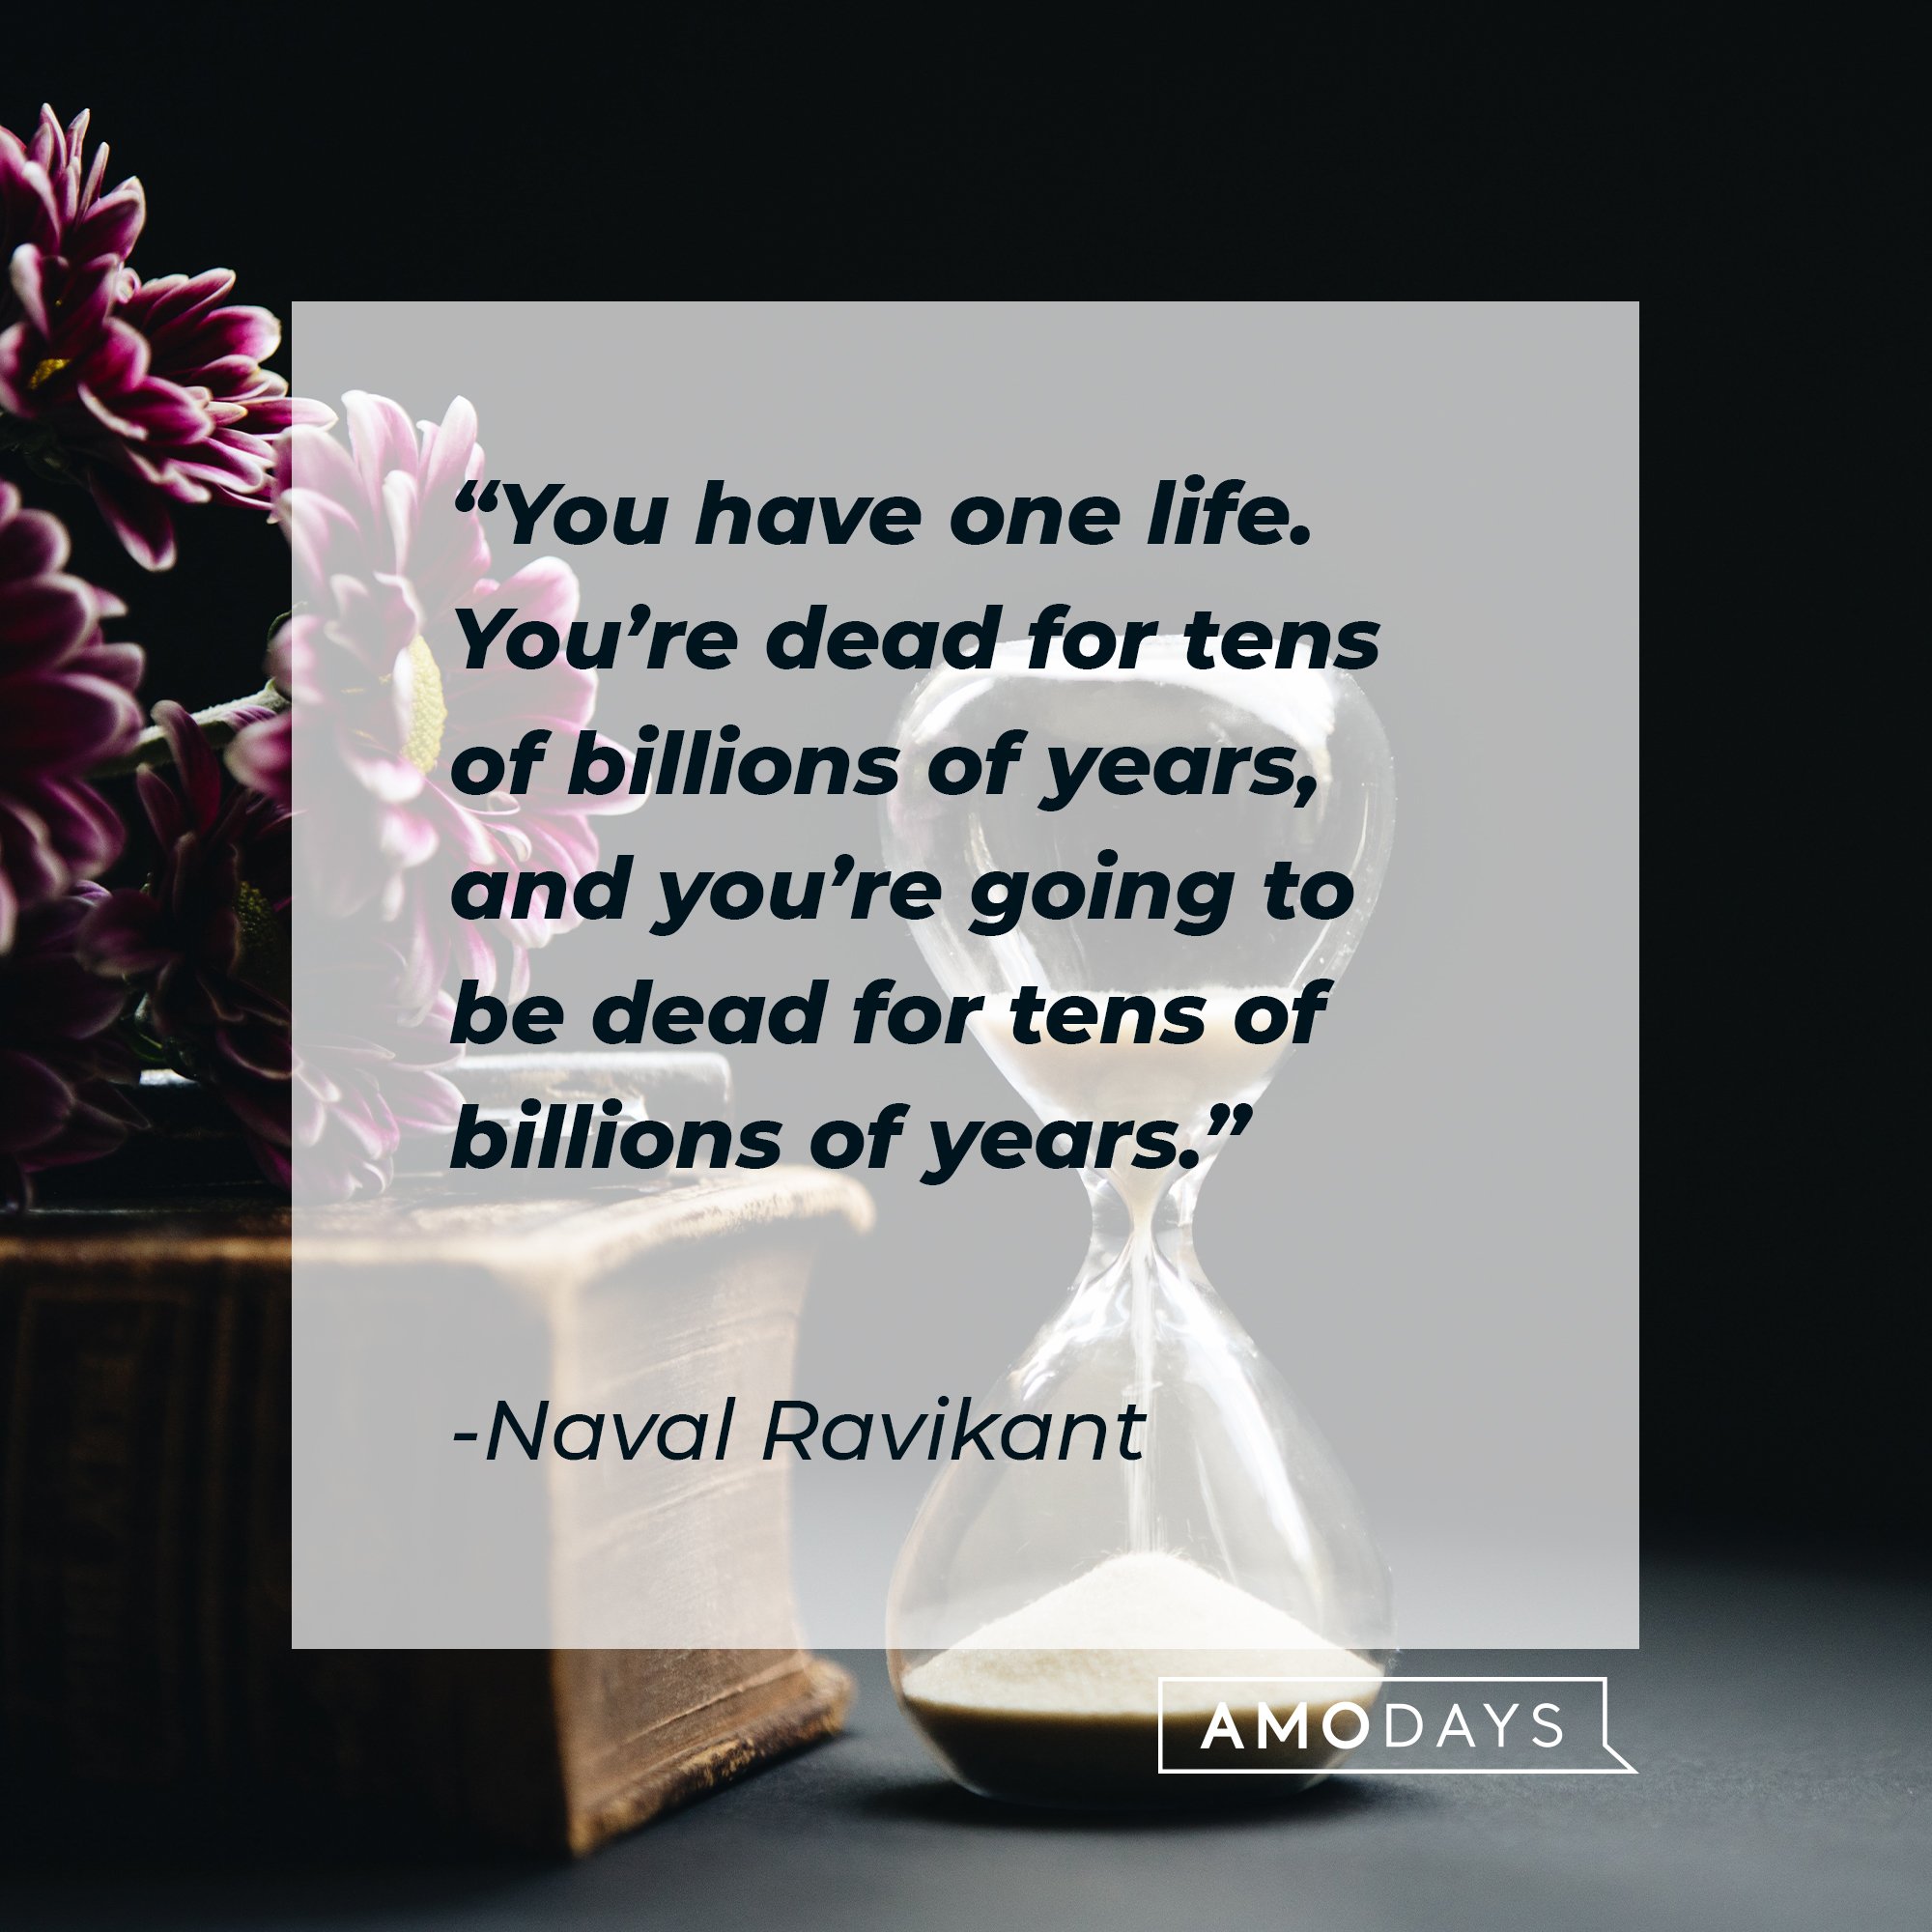 Naval Ravikant's quote: "You have one life. You’re dead for tens of billions of years, and you’re going to be dead for tens of billions of years." | Image: AmoDays